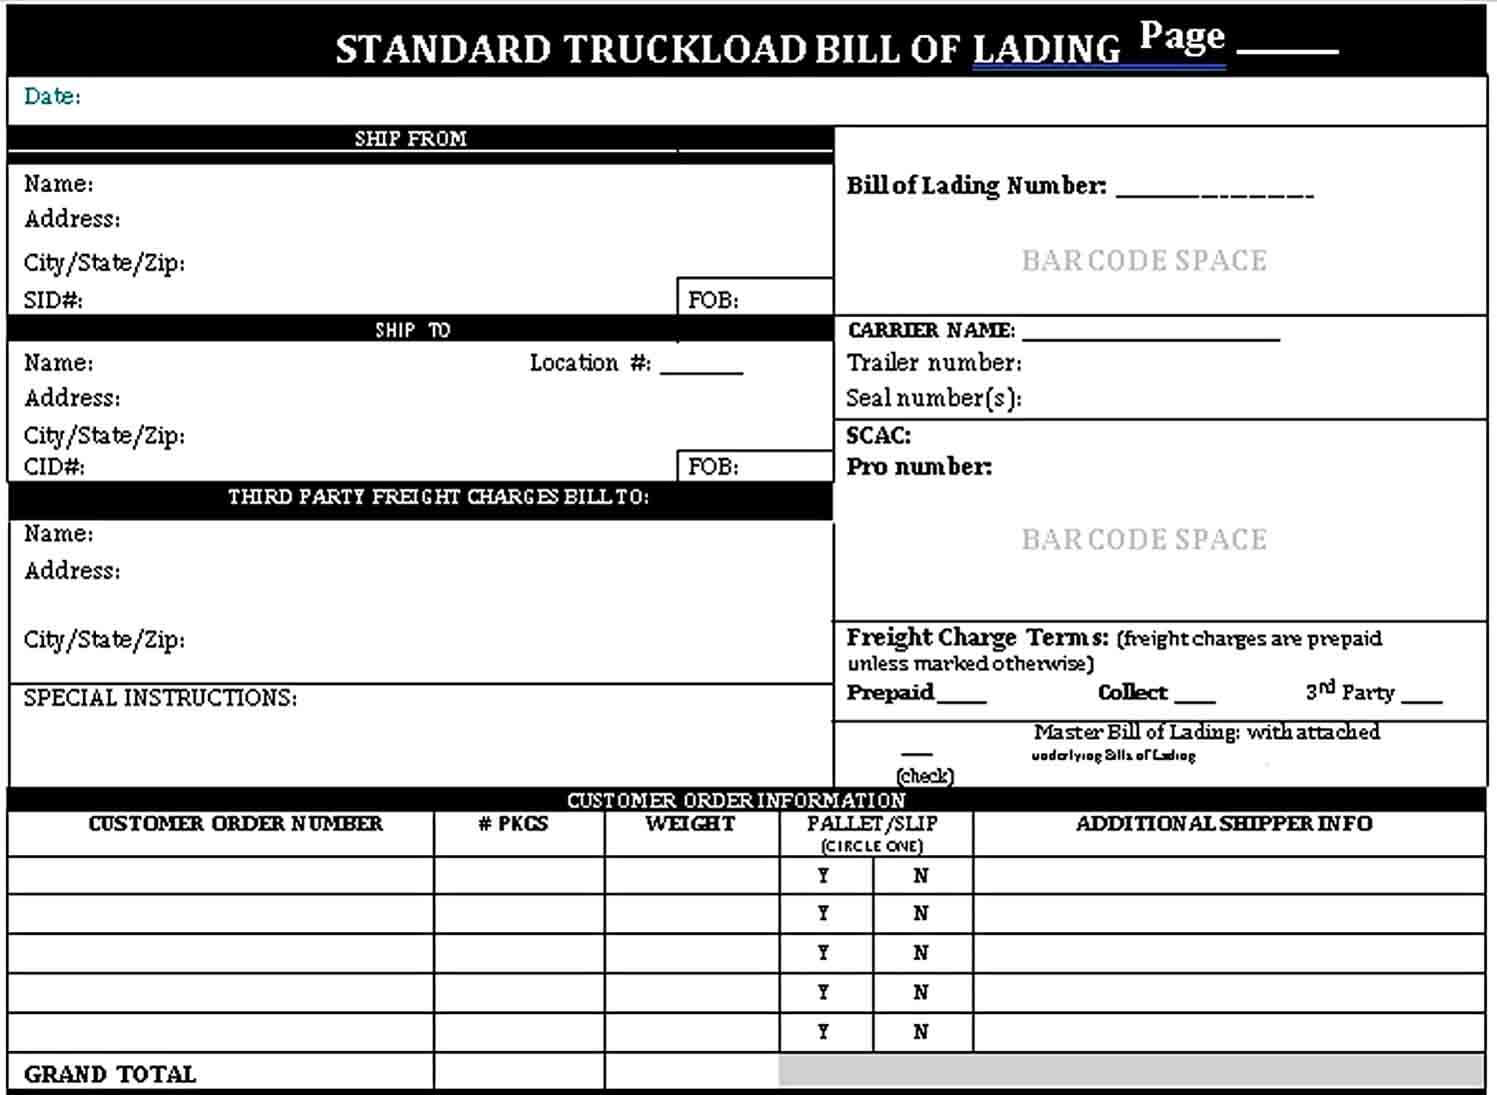 bill of lading front